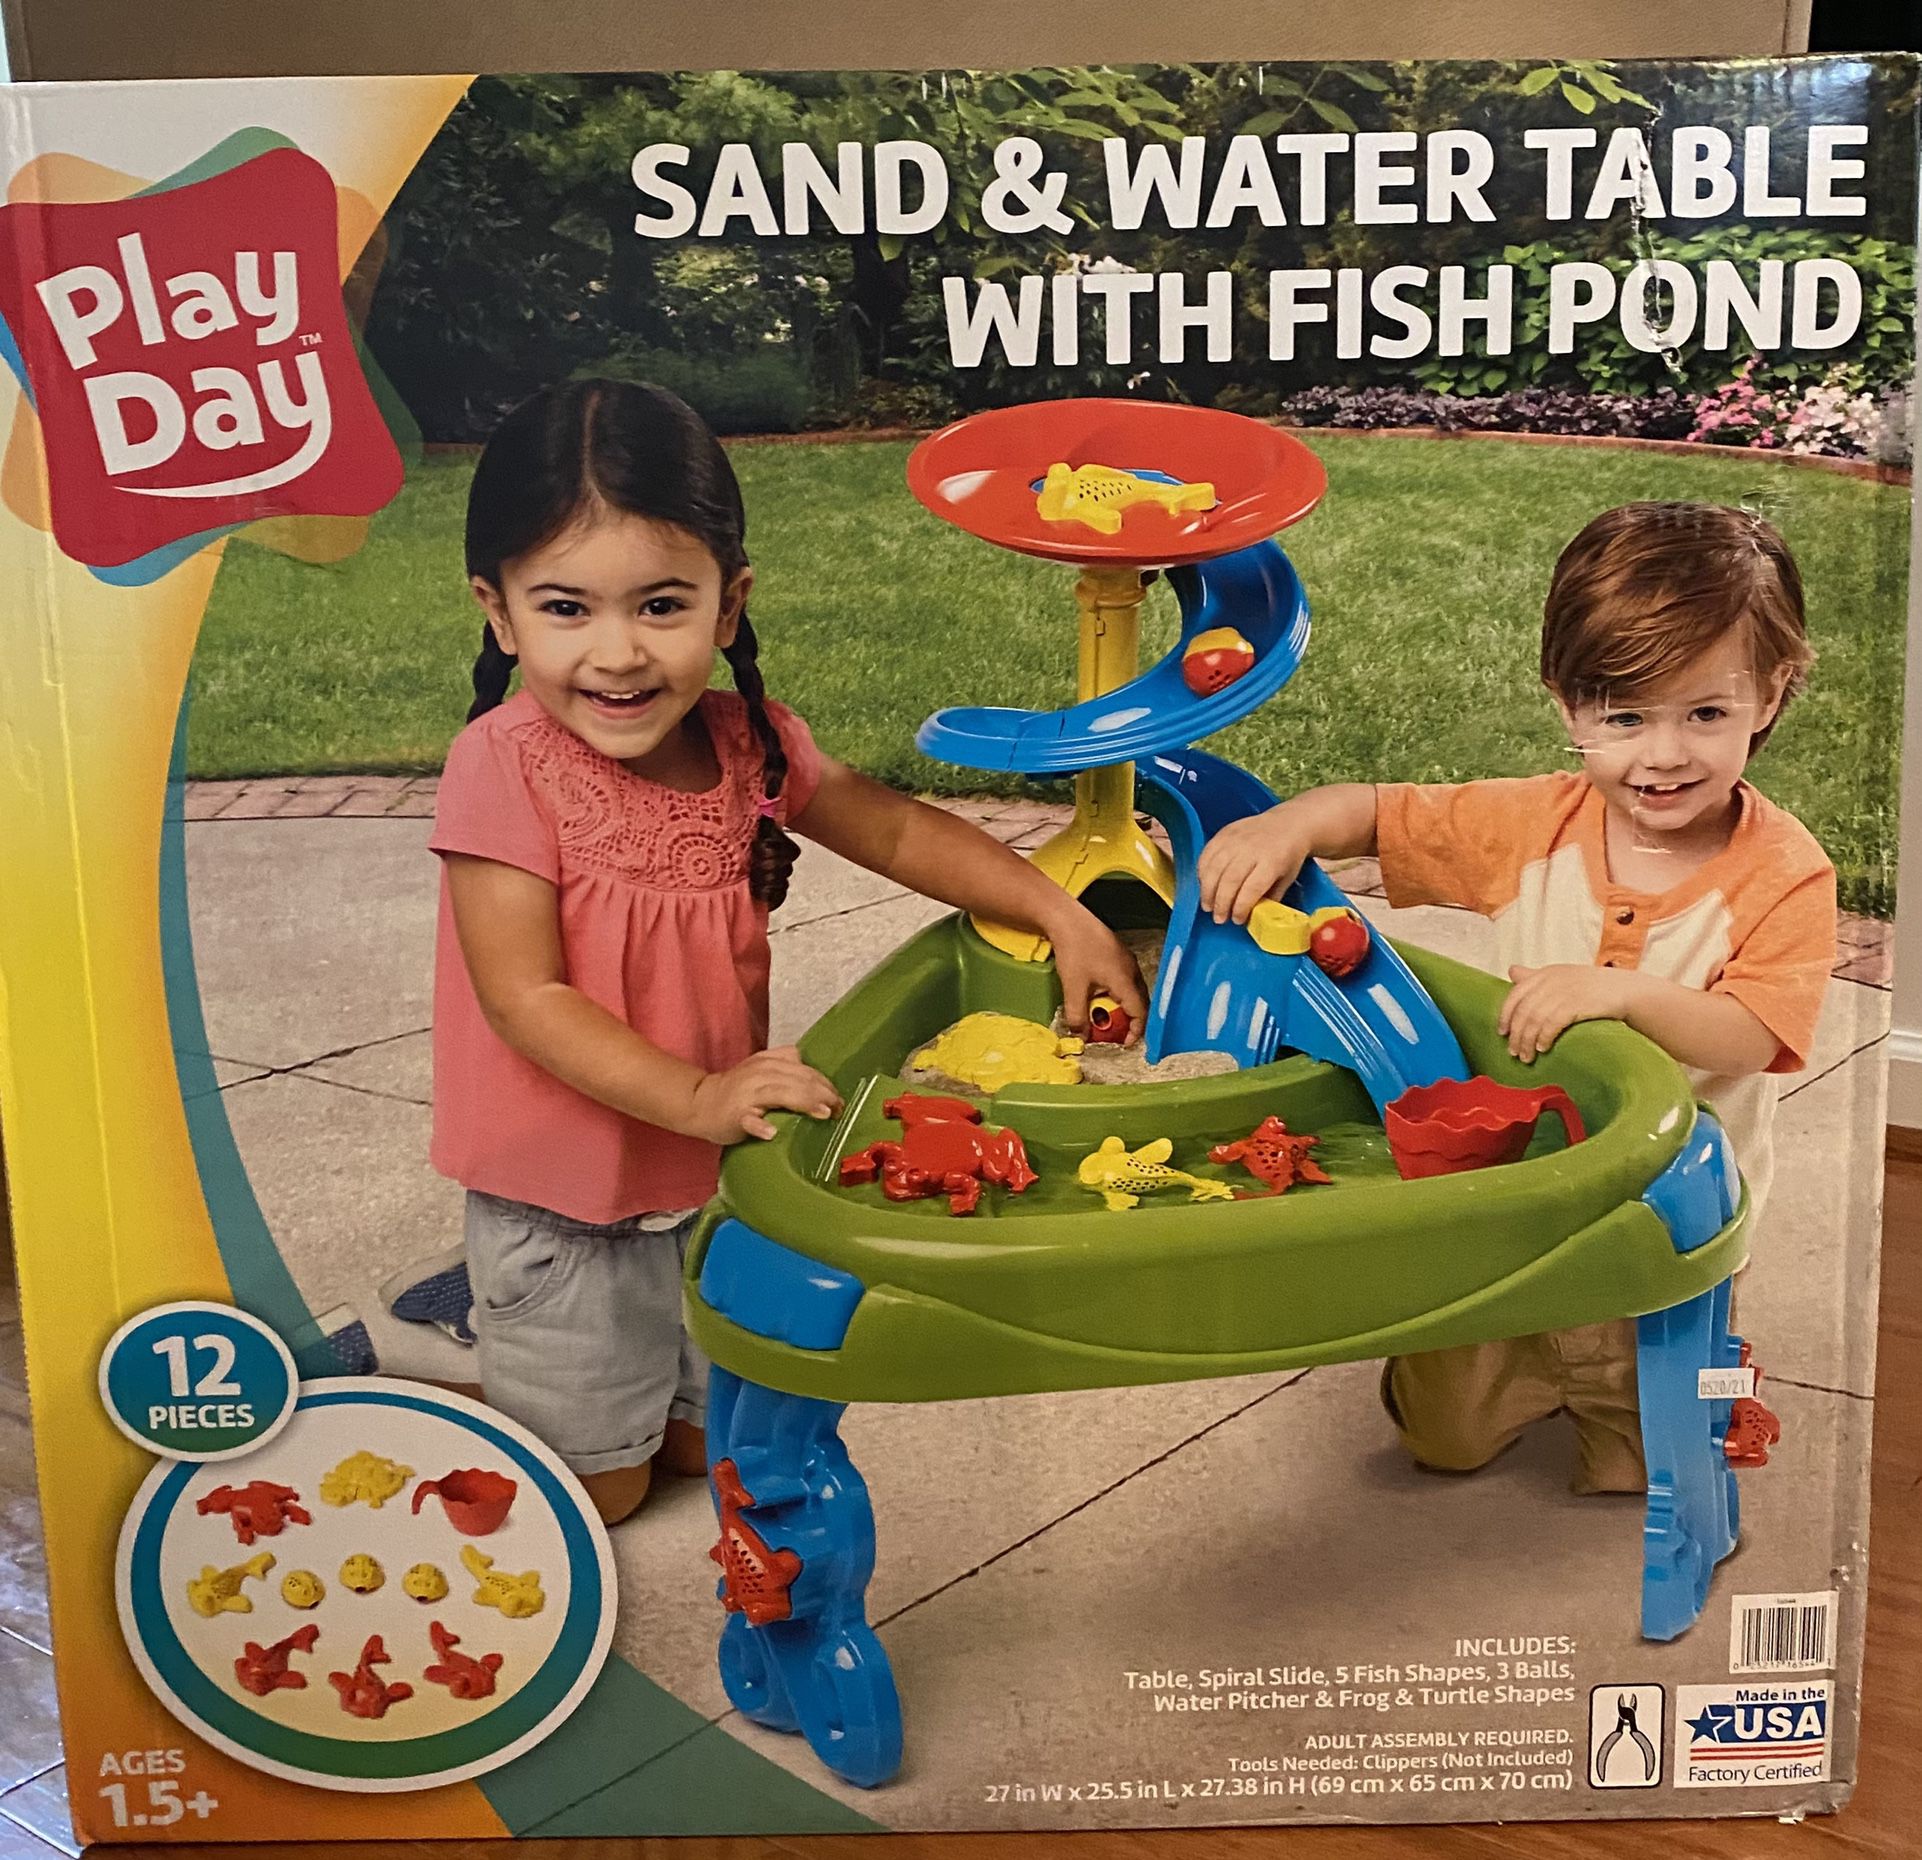 New Kids Sand & Water Table With Fish Pond